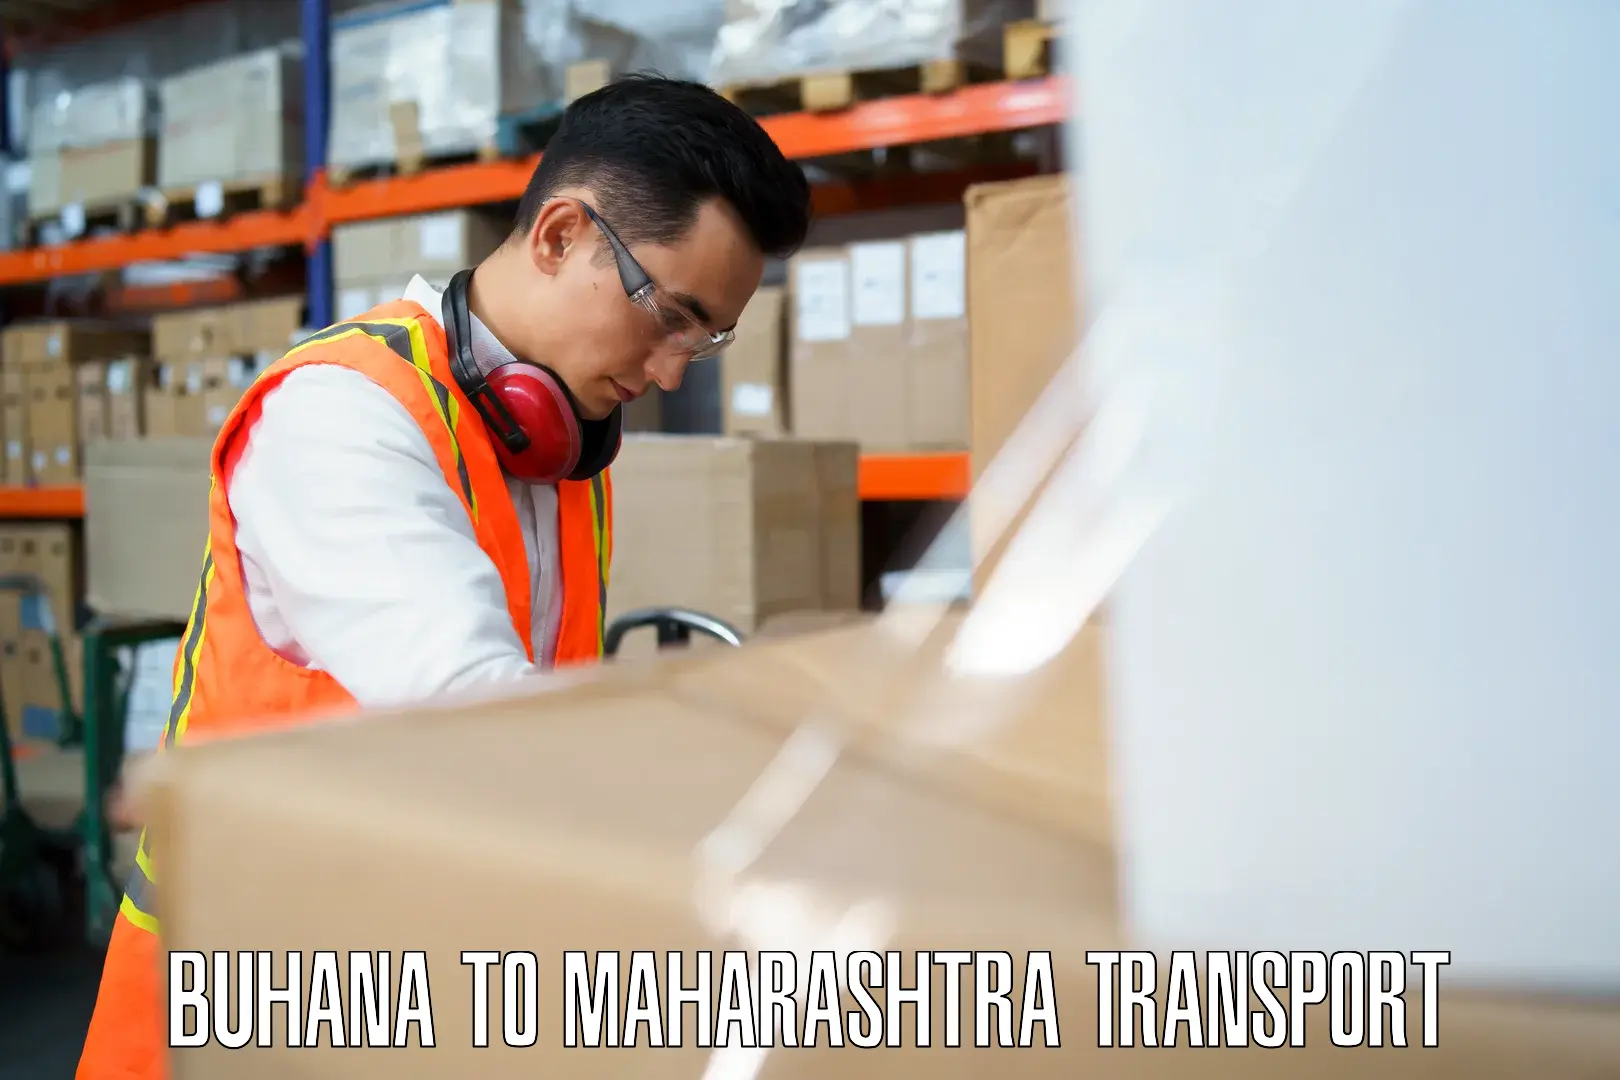 Part load transport service in India Buhana to Nagothane